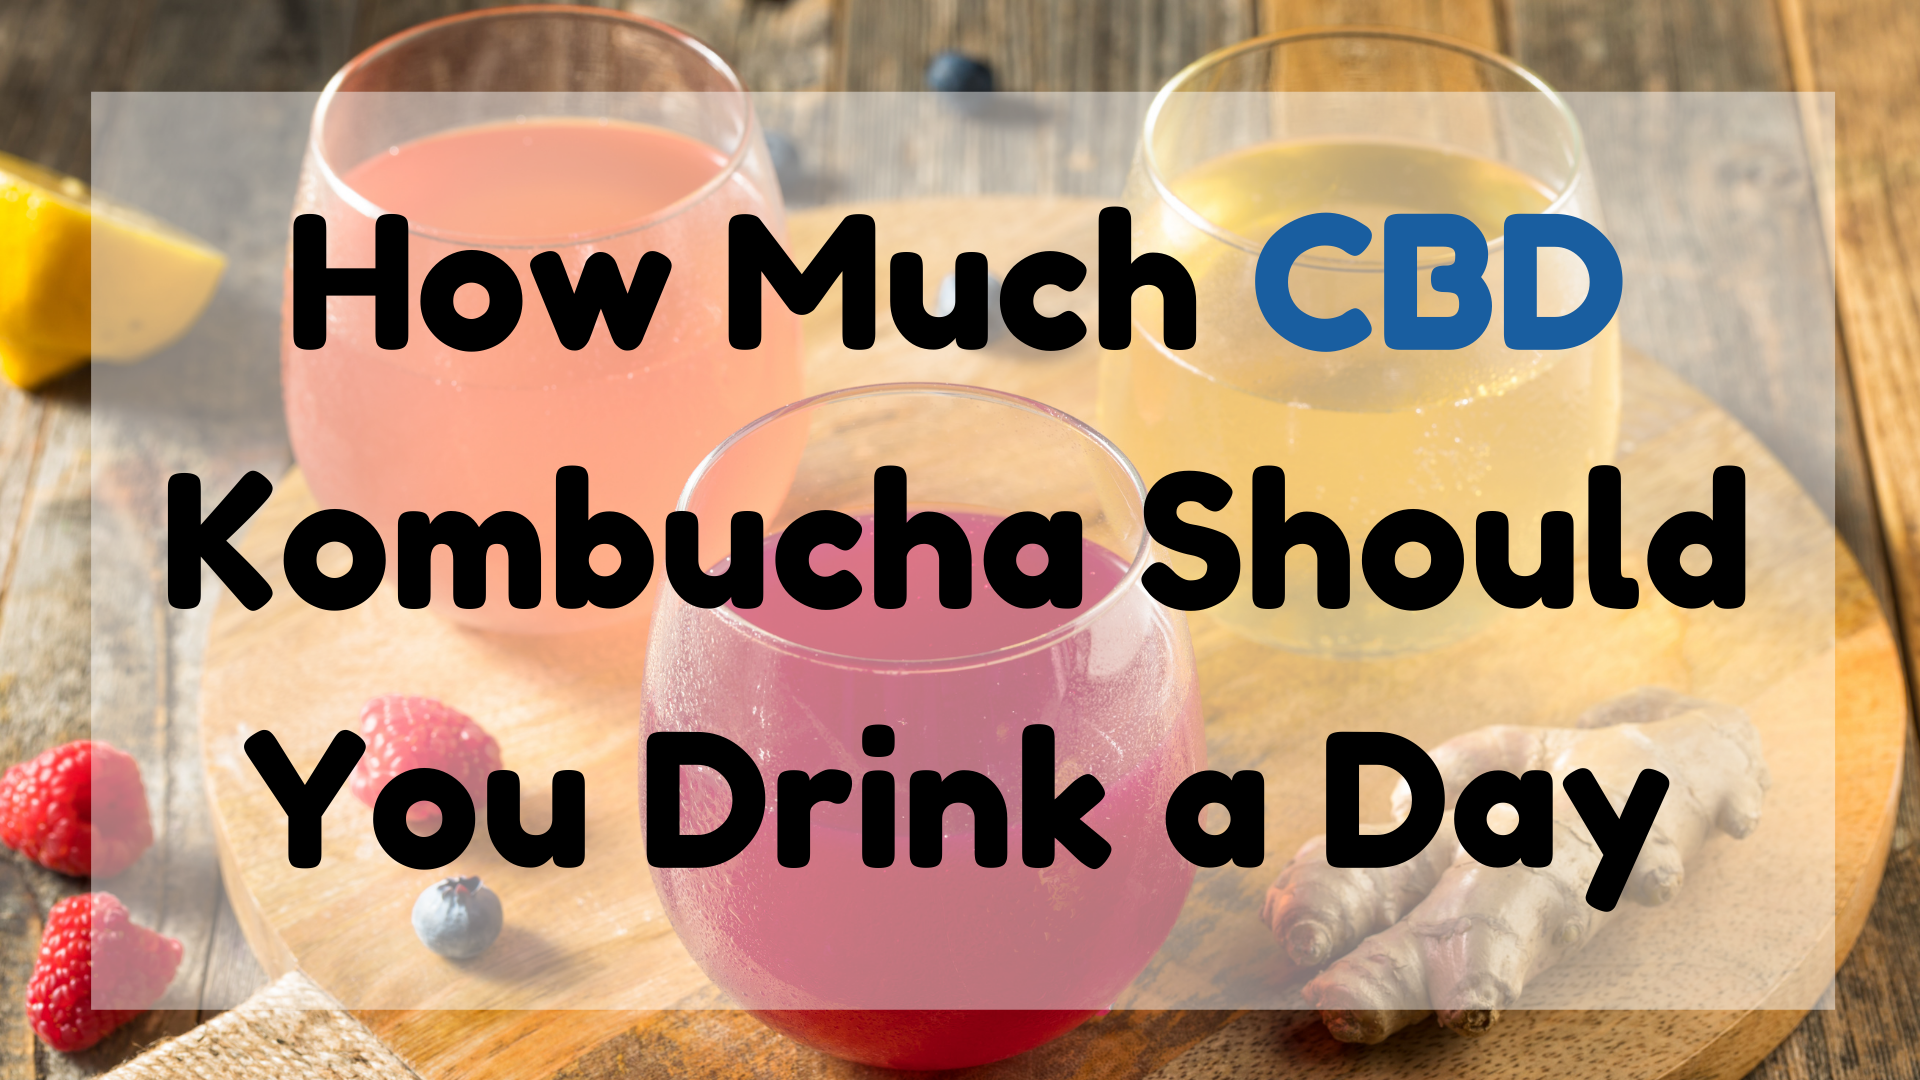 How Much CBD Kombucha Should You Drink a Day